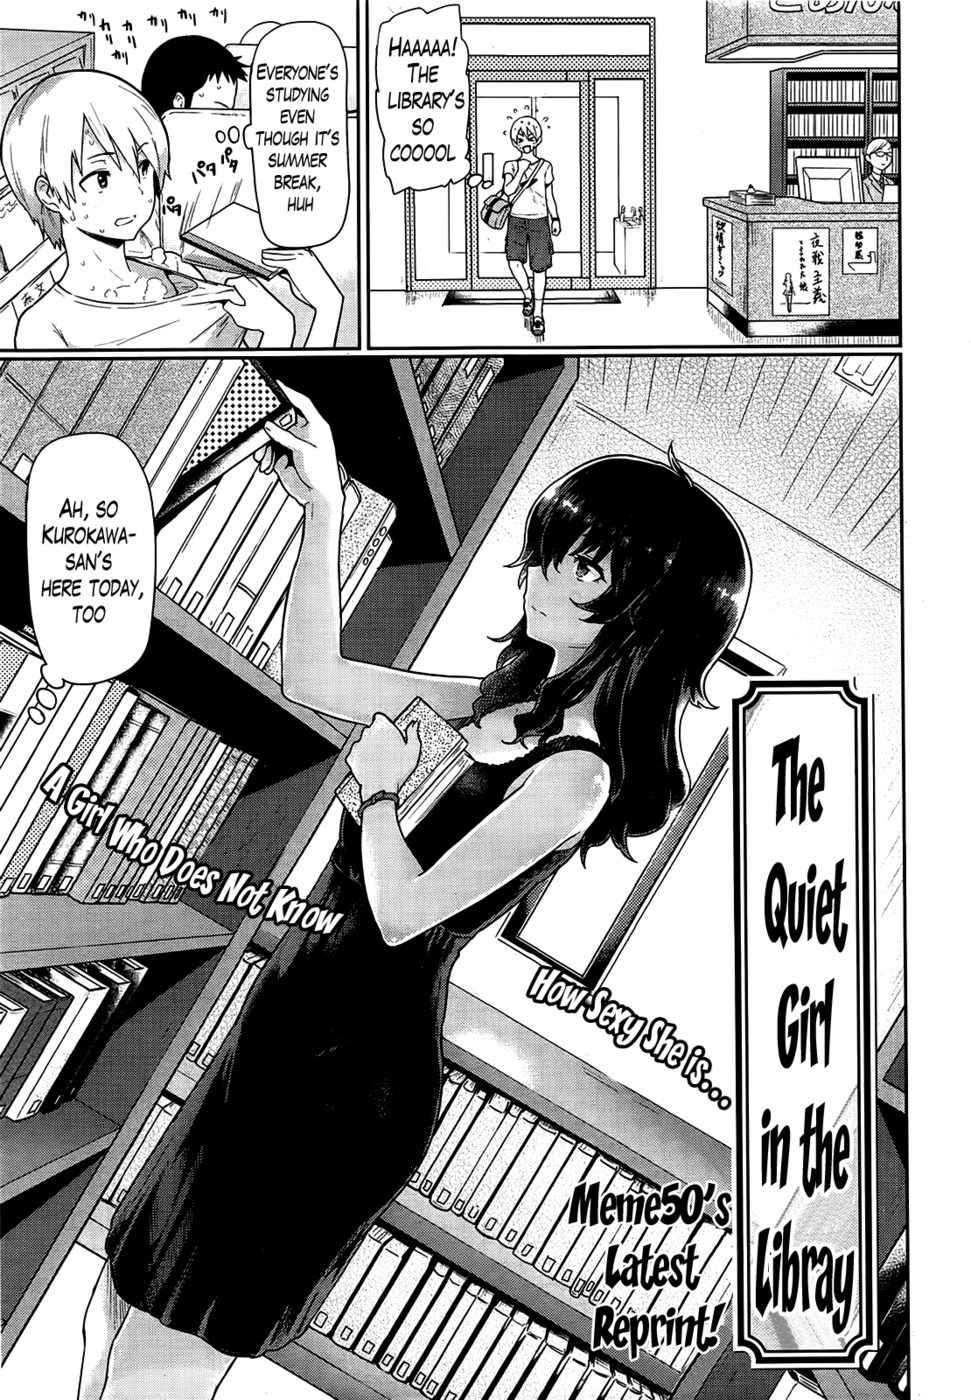 Hentai Manga Comic-The Quiet Girl in the Library-Read-1